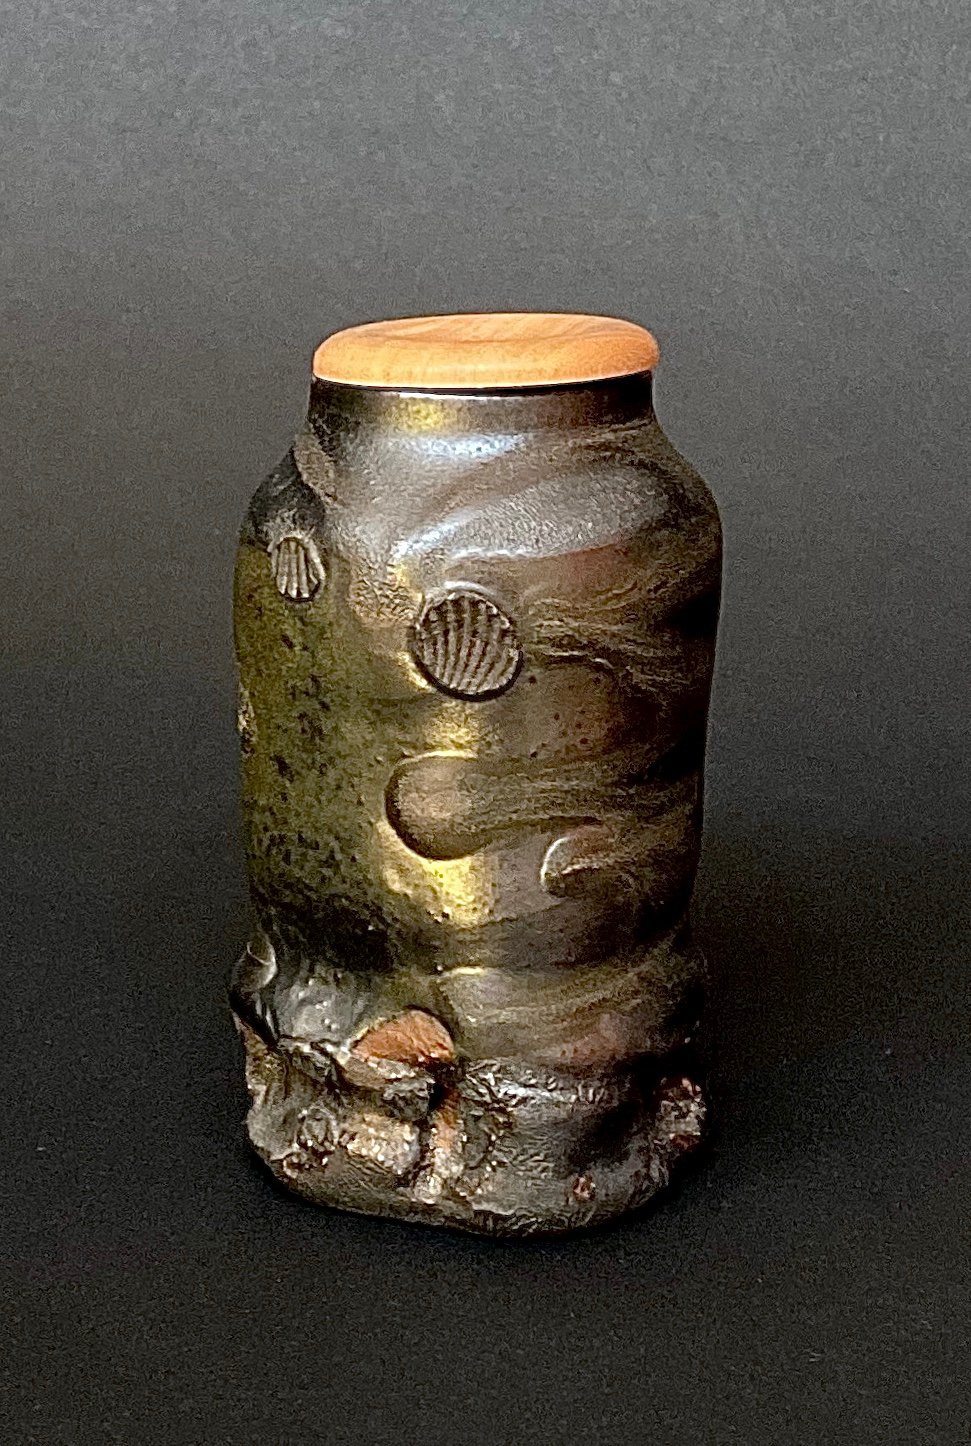 Small lidded container #11